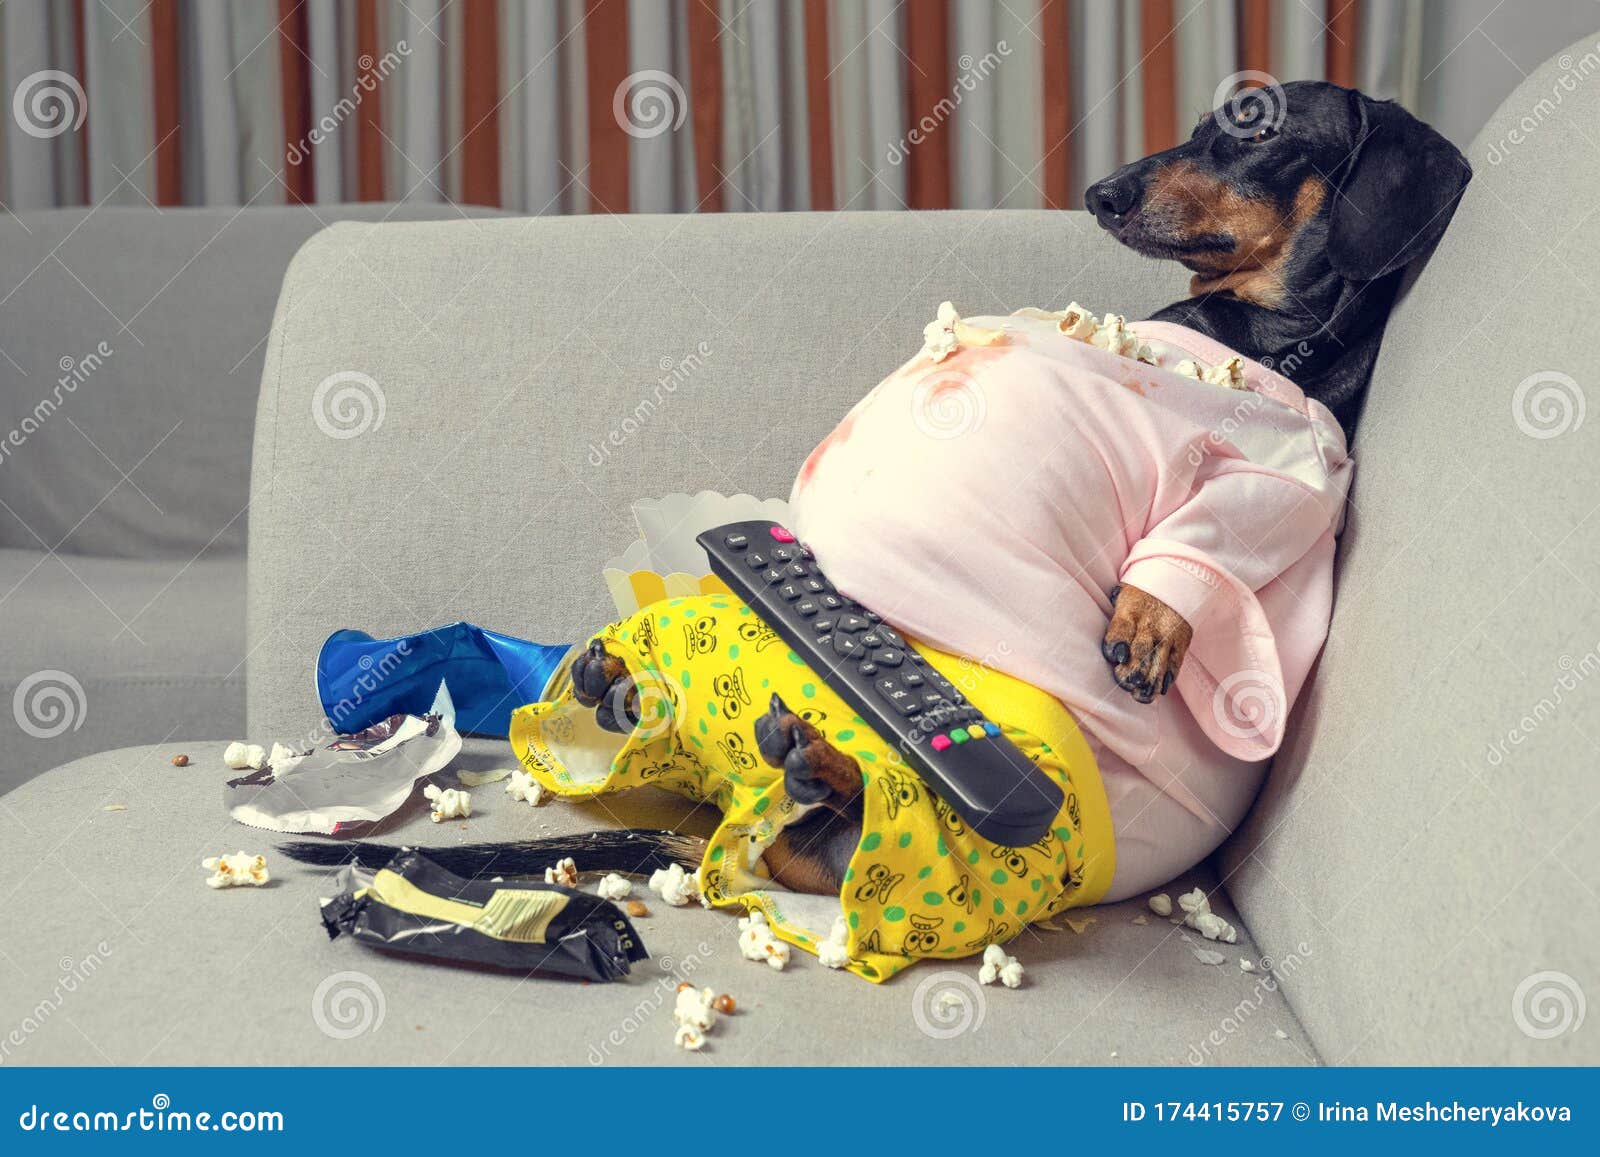 15 070 Fat Dog Photos Free Royalty Free Stock Photos From Dreamstime